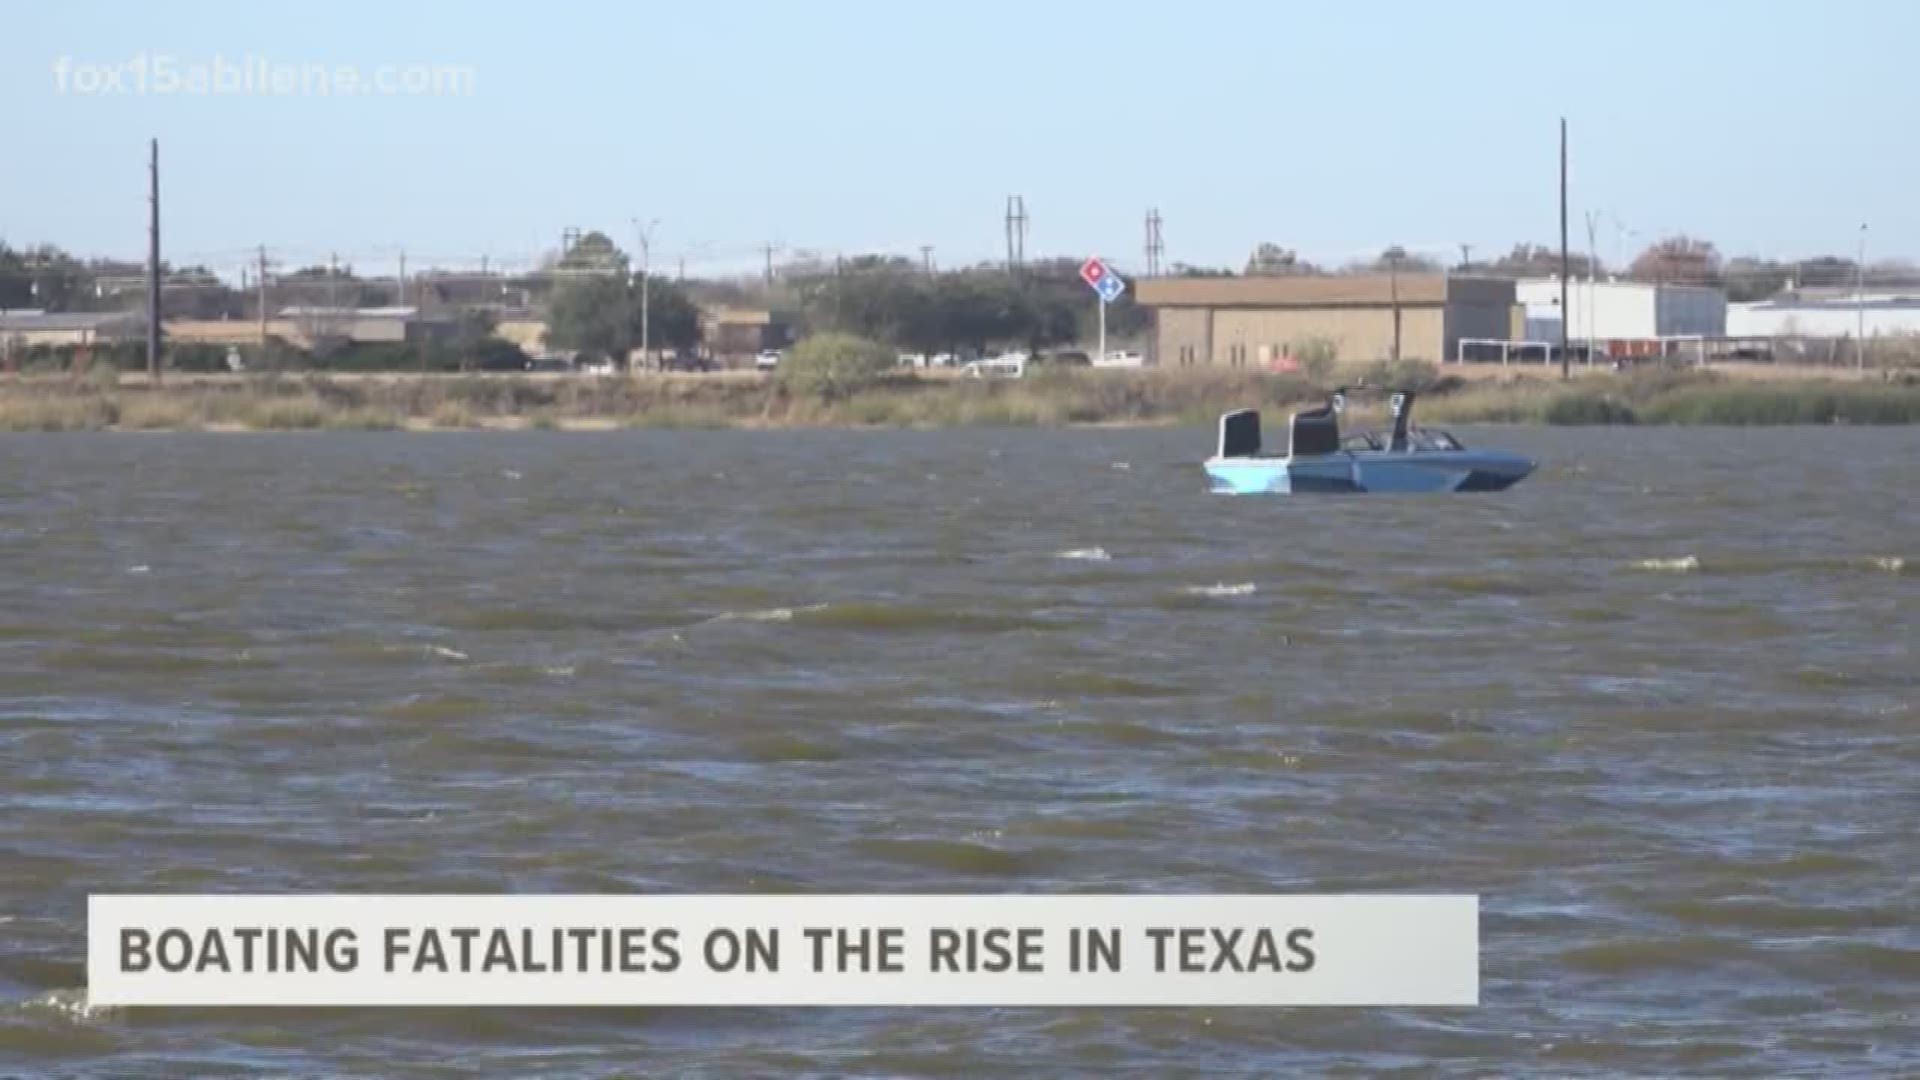 In 2017, 45 boating fatalities occurred on Texas waters.